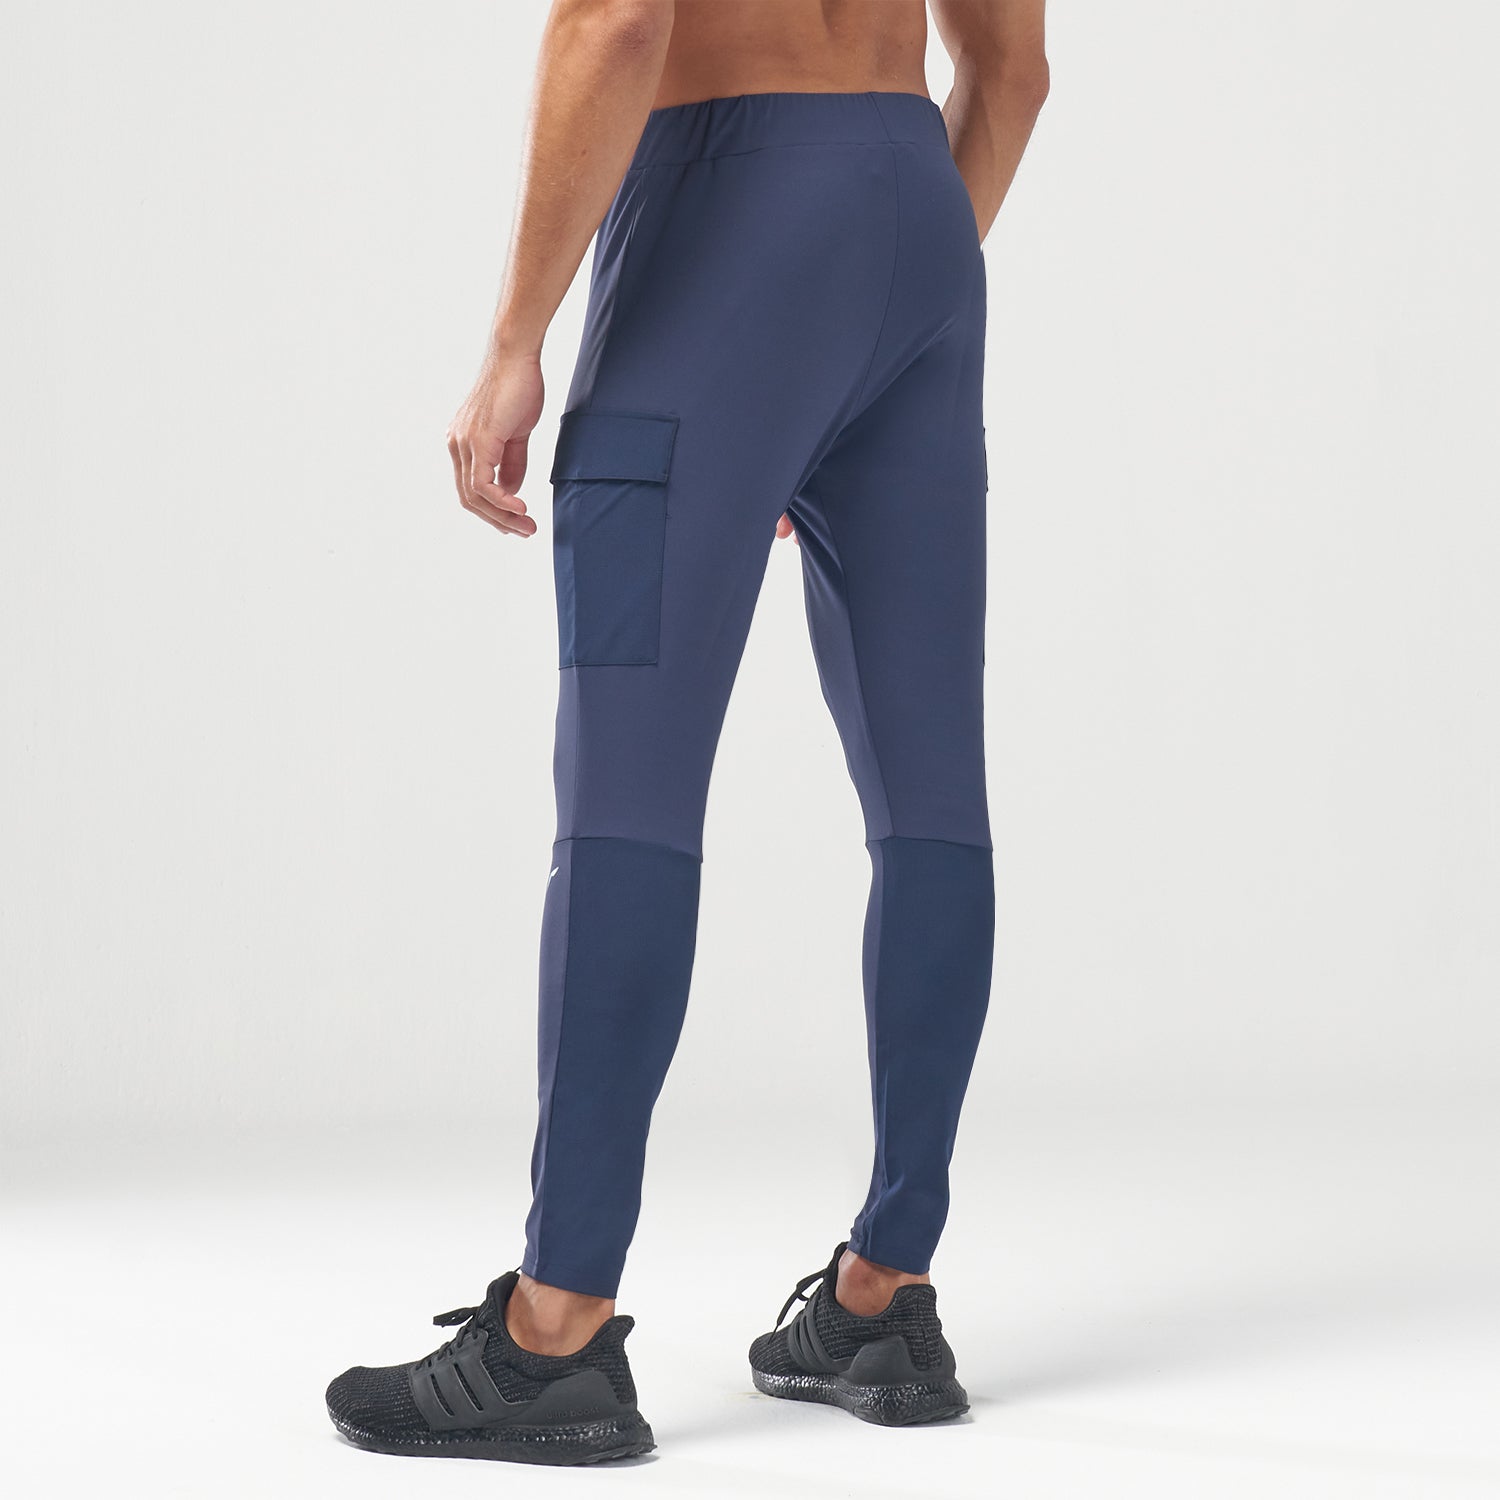 squatwolf-gym-wear-code-cargo-running-tights-blue-workout-tights-for-men